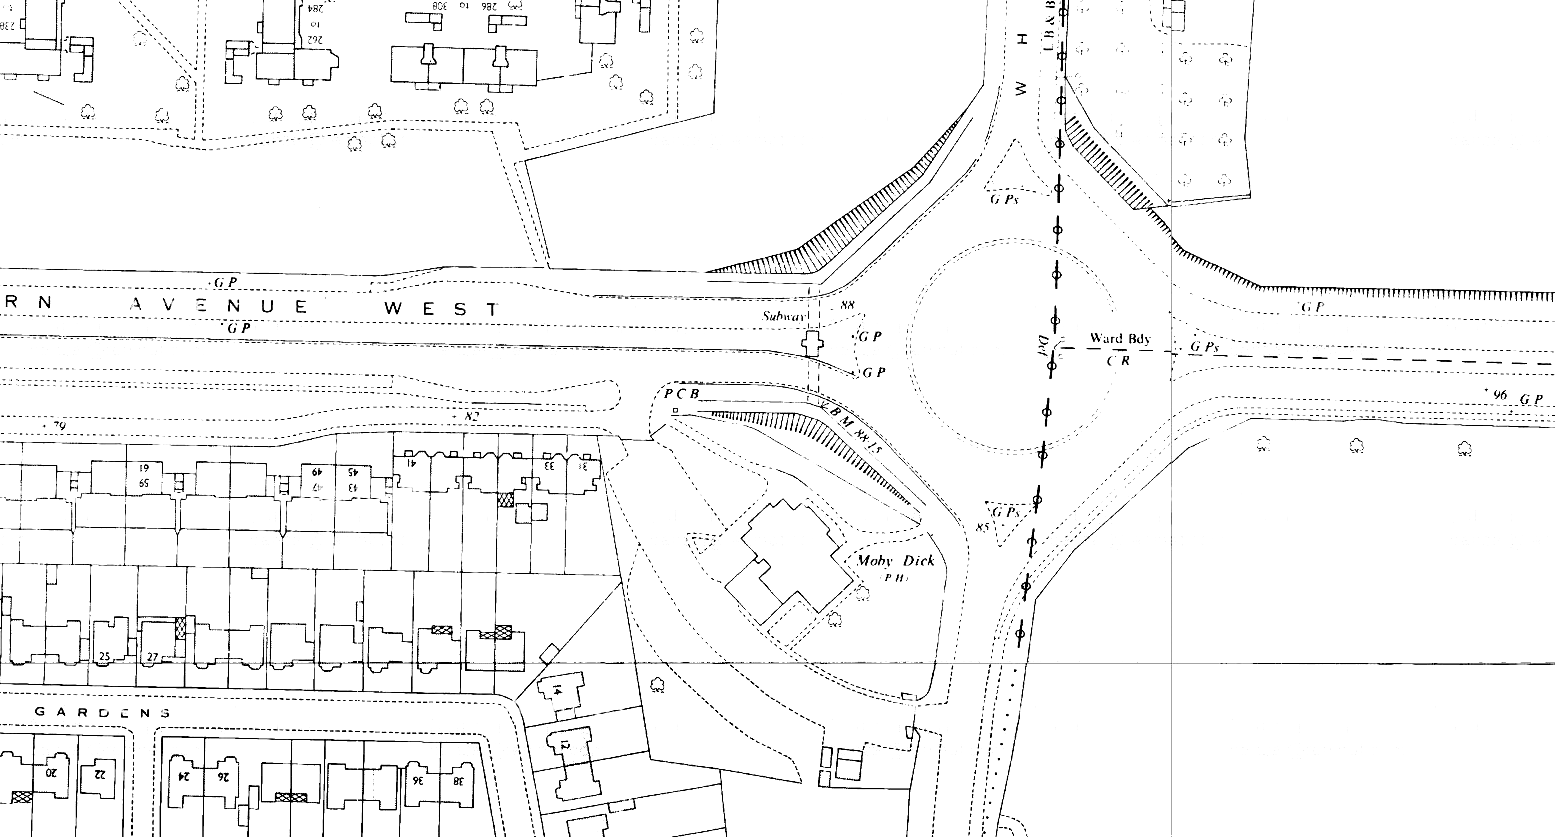 K19--Moby Dick Roundabout, Chadwell Heath Box--1963 OS Map Extract 1-1250.png